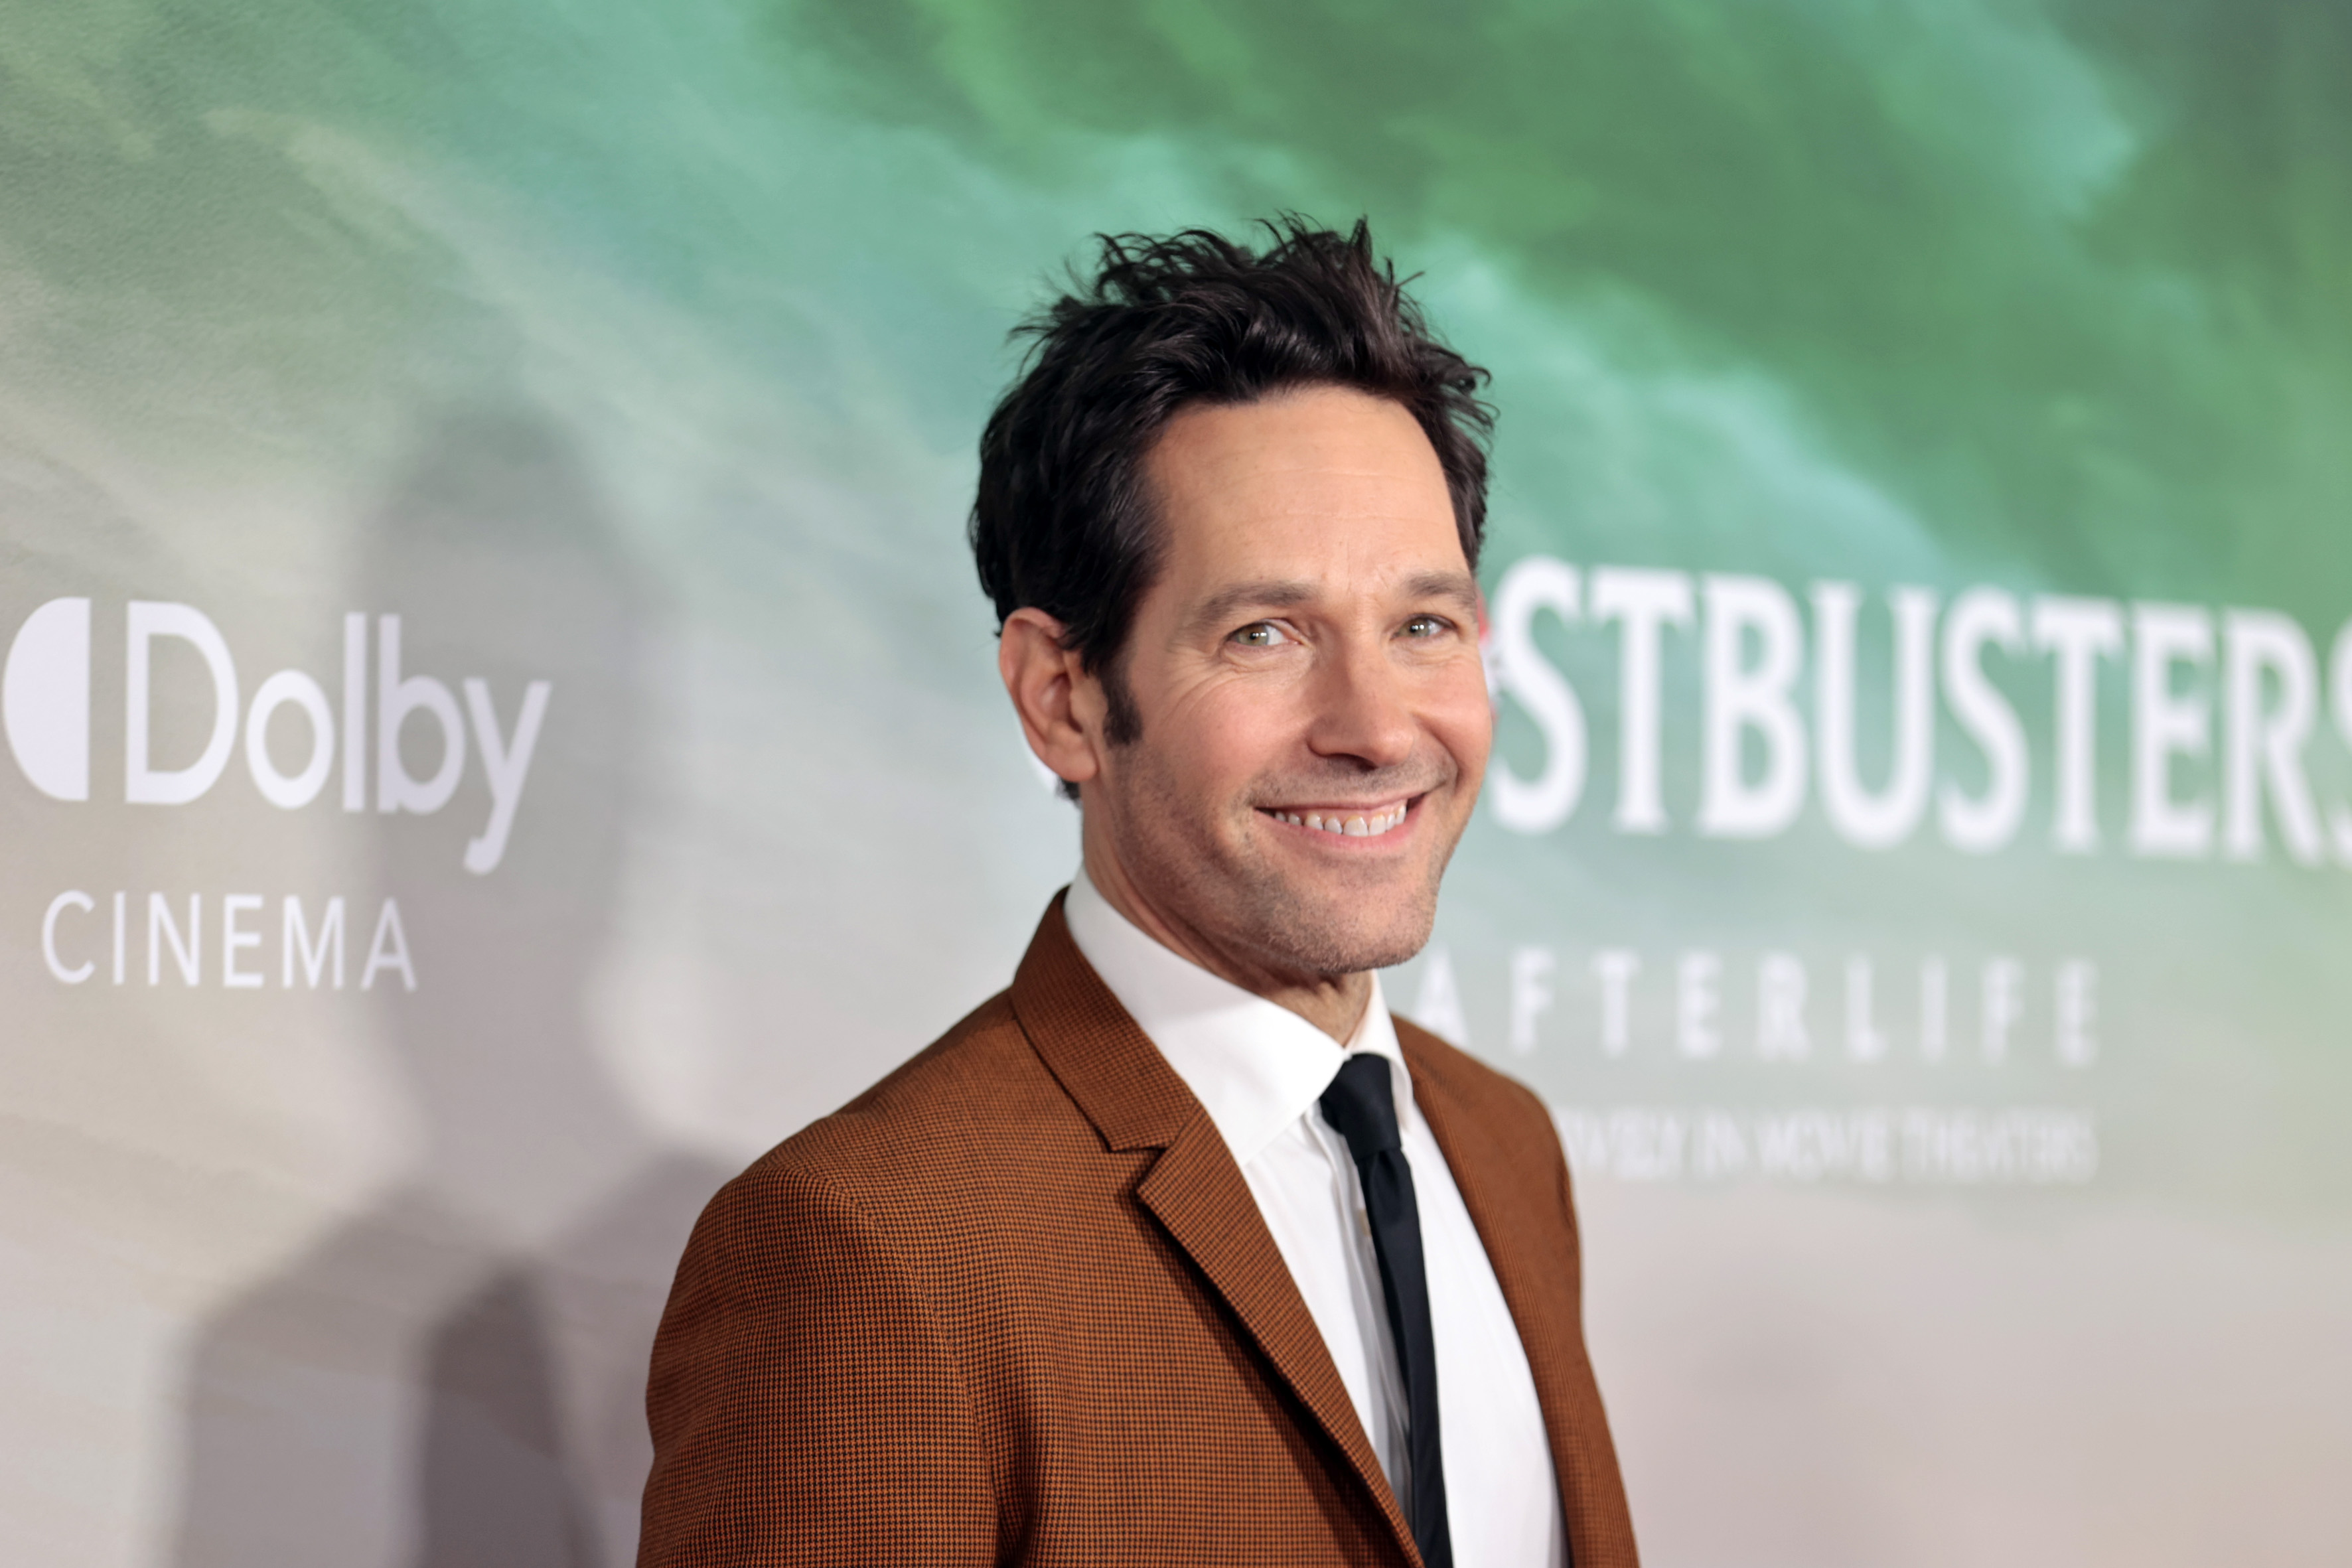 Paul Rudd bei der "Ghostbusters: Afterlife" New York Premiere im AMC Lincoln Square Theater am 15. November 2021 | Quelle: Getty Images